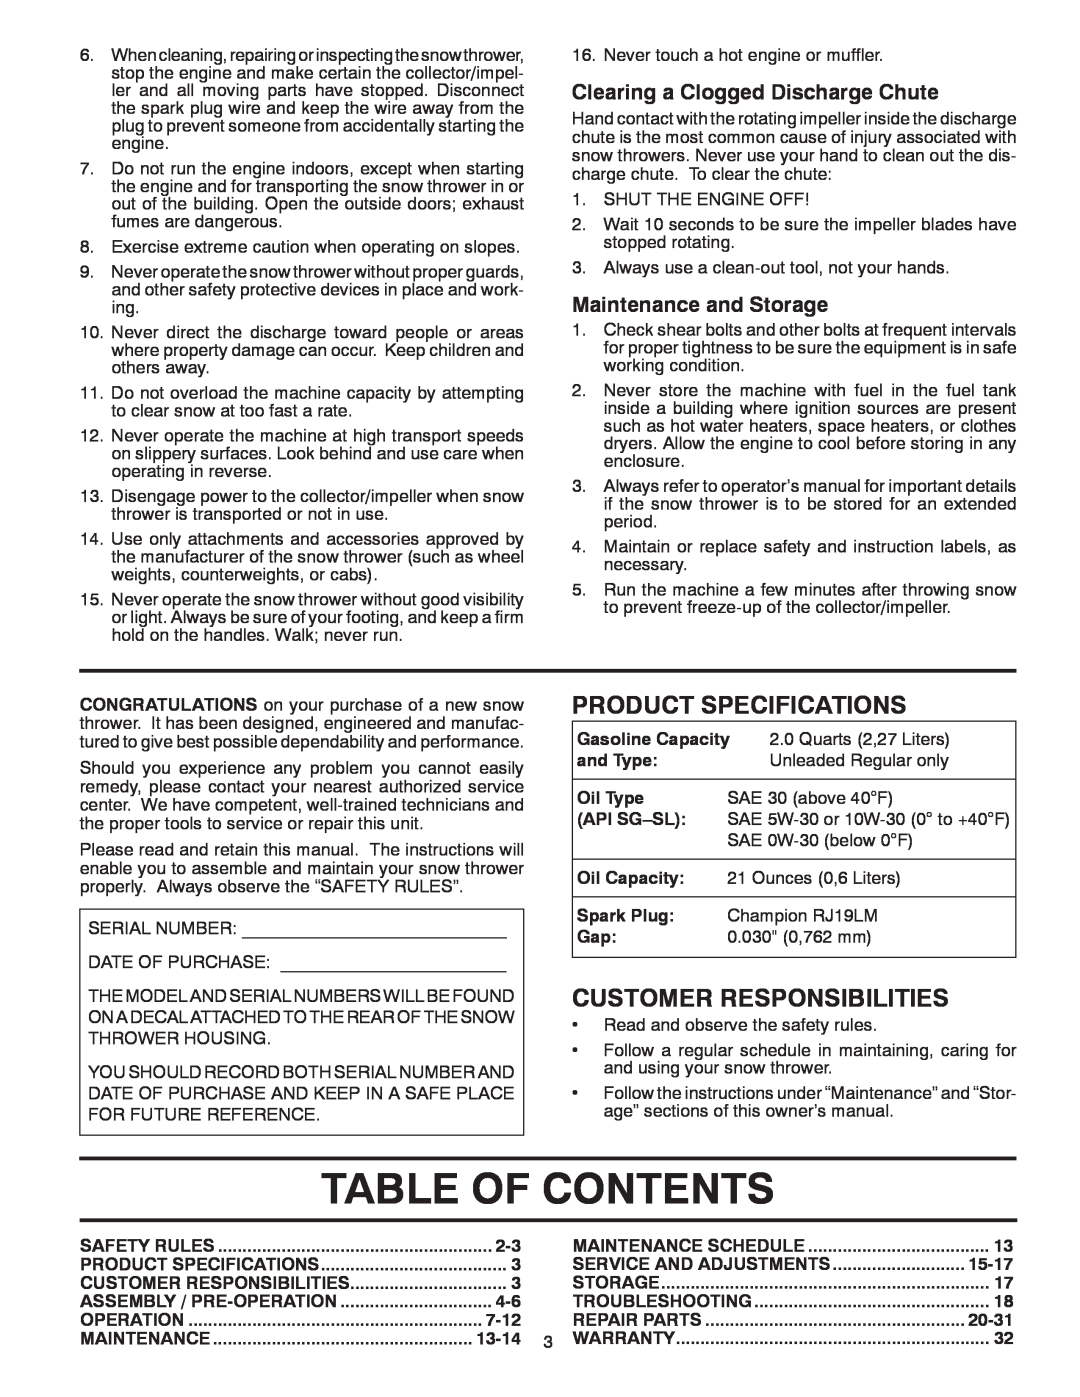 Poulan 416829 Table Of Contents, Product Specifications, Customer Responsibilities, Clearing a Clogged Discharge Chute 